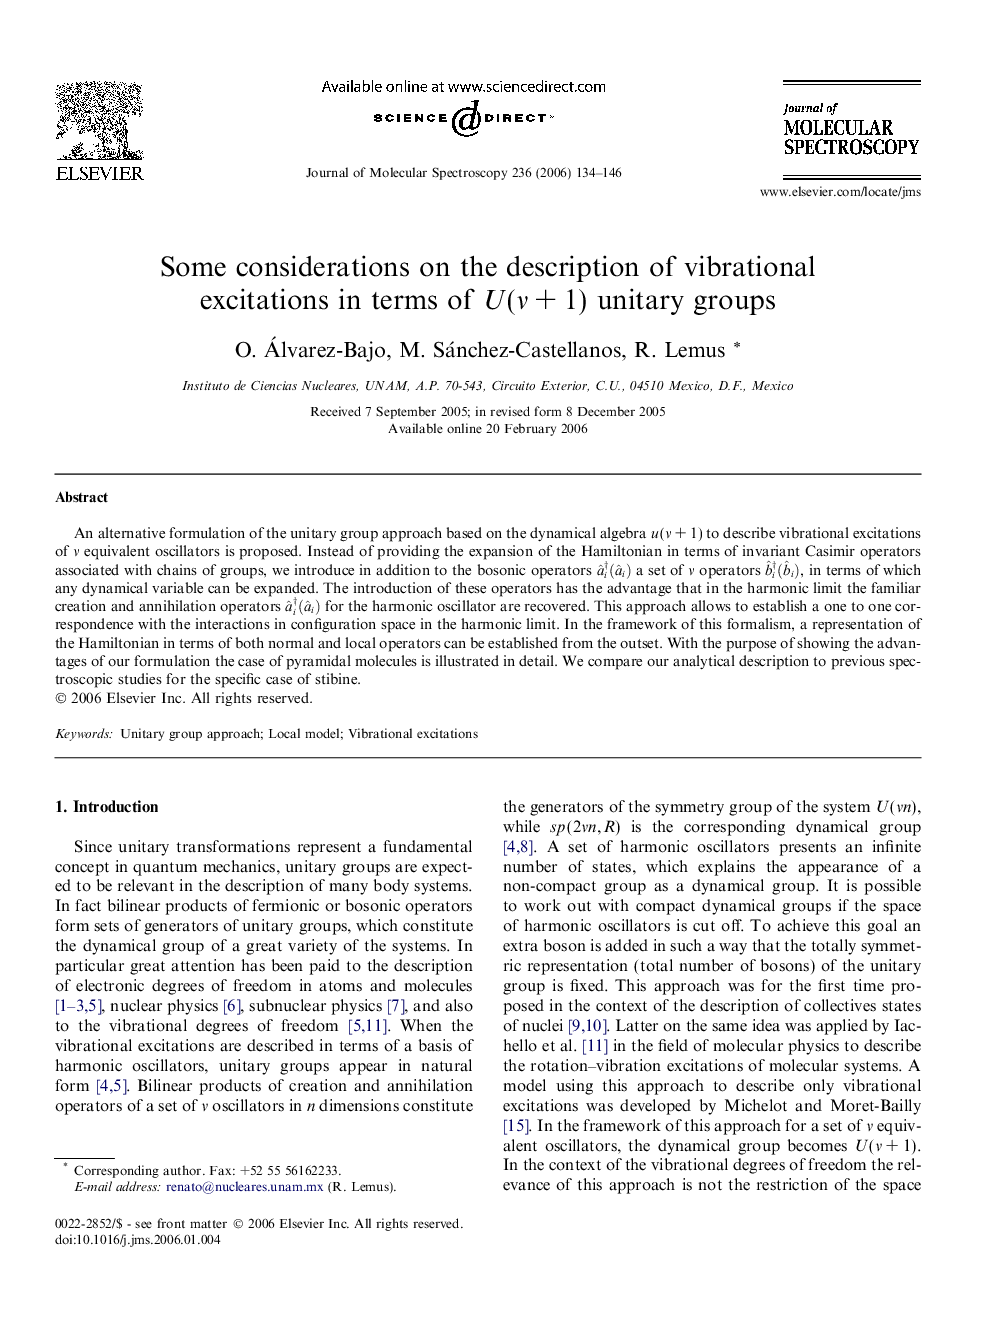 Some considerations on the description of vibrational excitations in terms of UÂ (Î½Â +Â 1) unitary groups